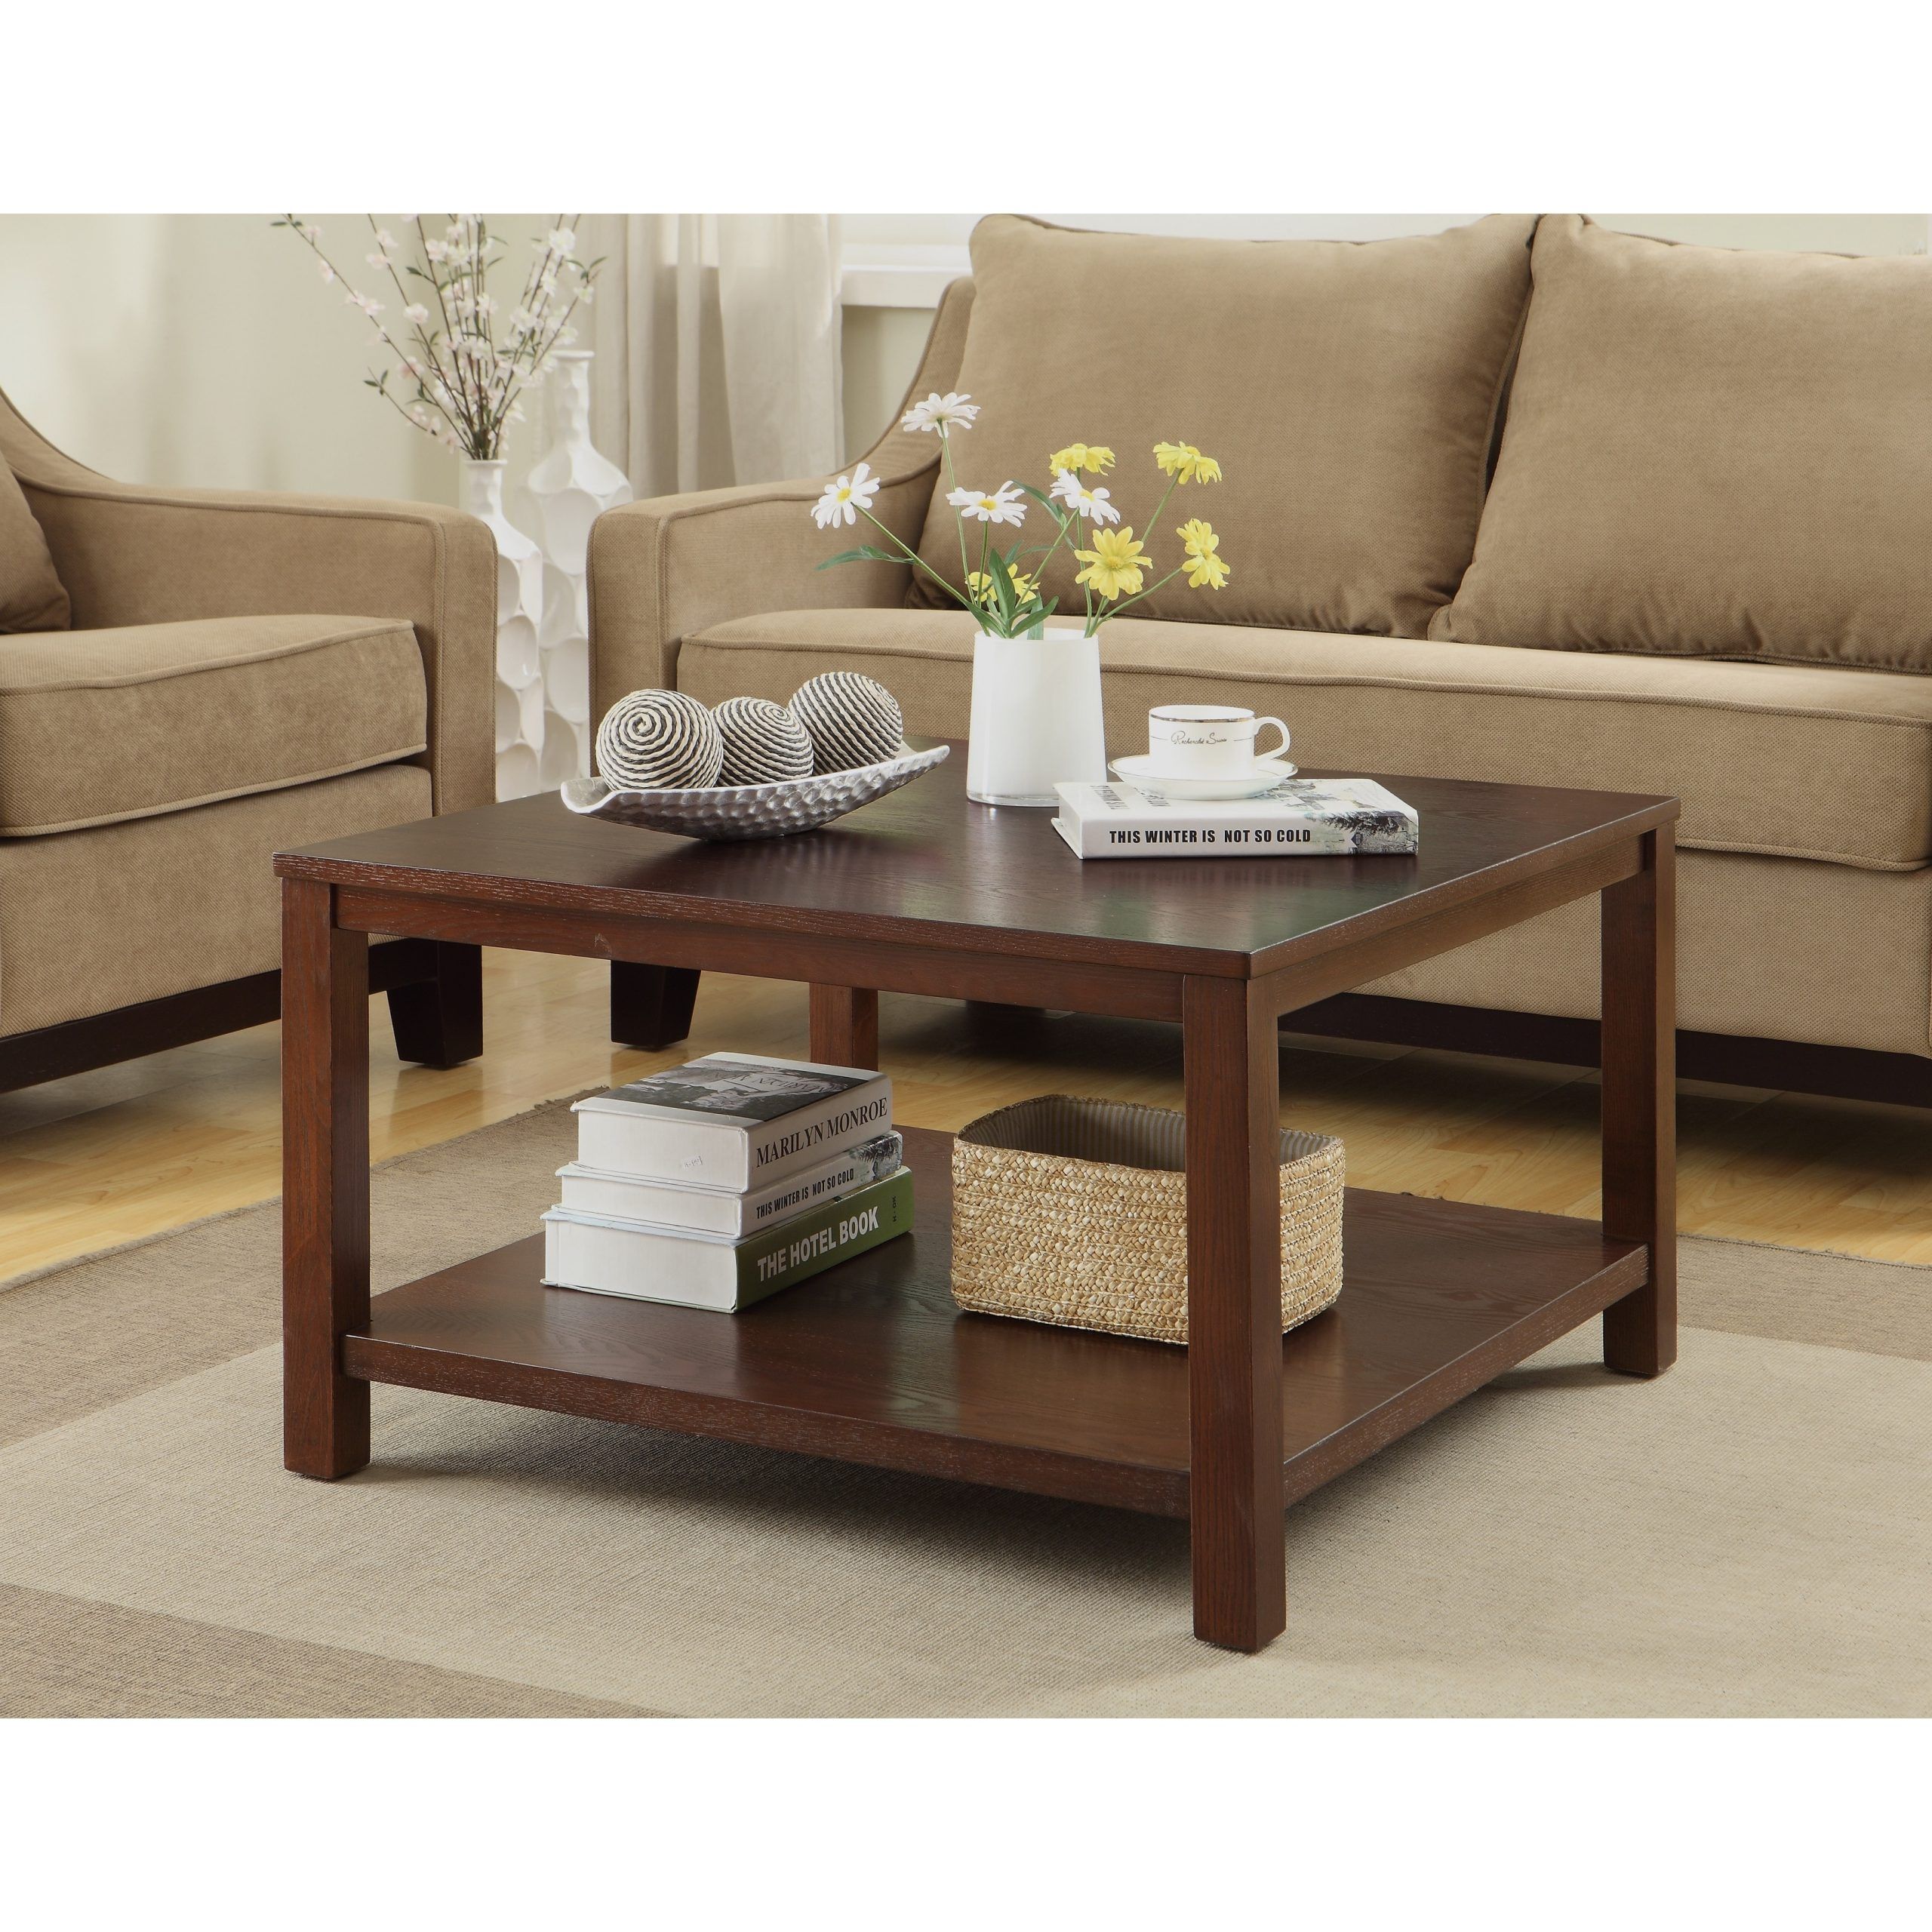 Square Coffee Table With Dual Shelves Solid Wood Legs & Wood | Ebay With Regard To Coffee Tables With Solid Legs (View 11 of 15)